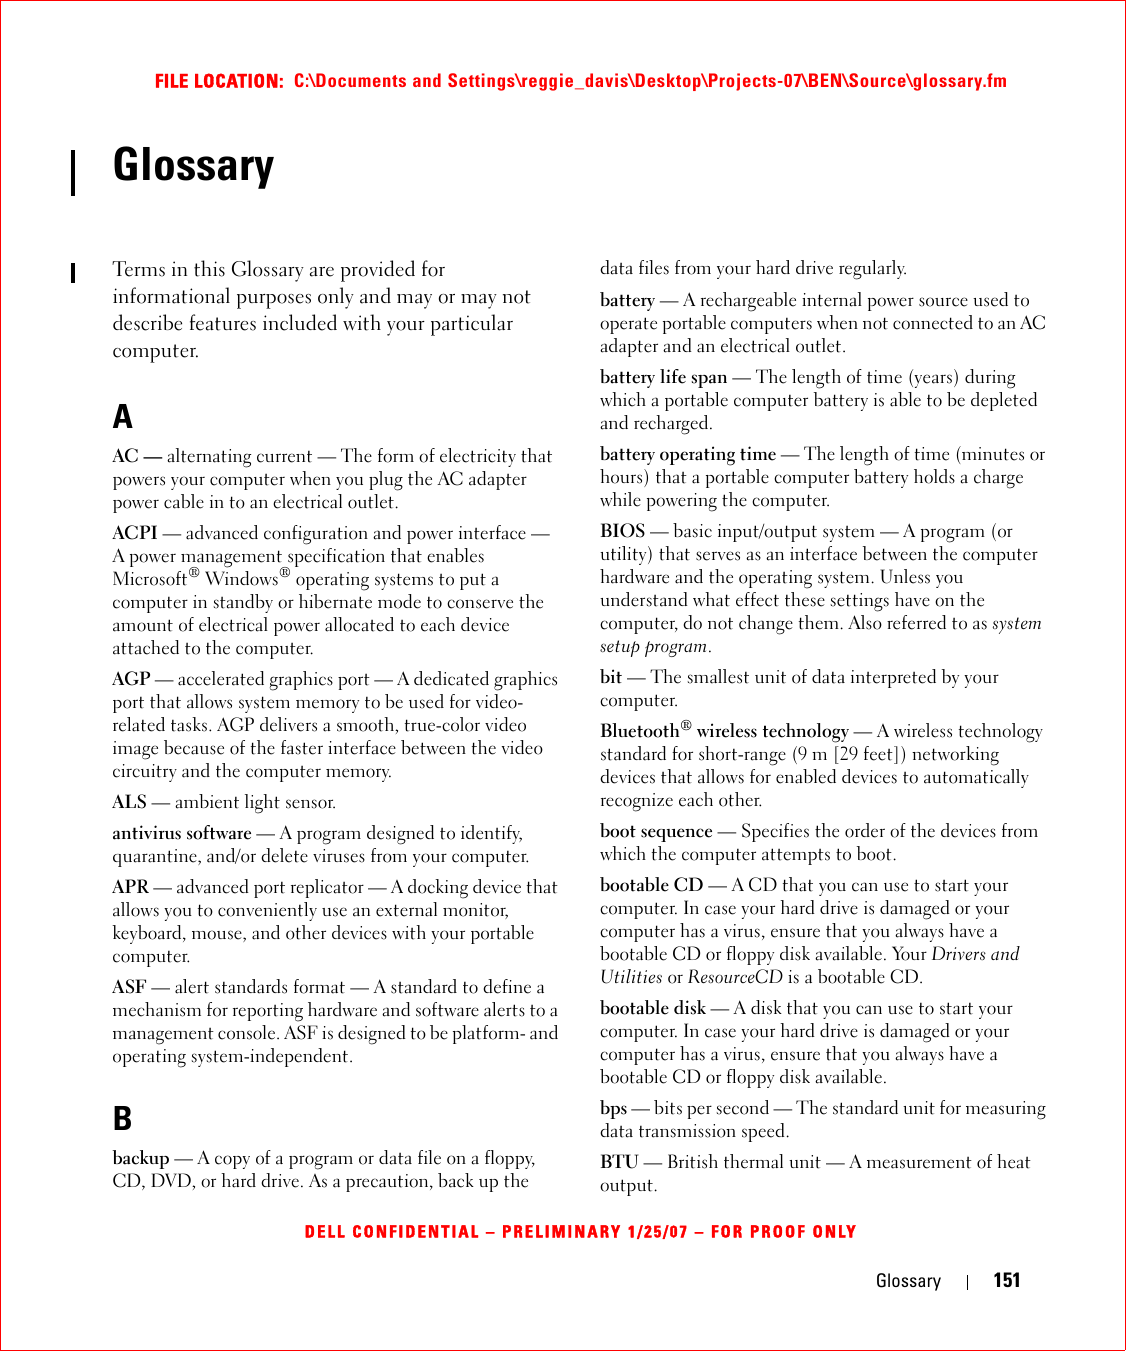 Glossary 151FILE LOCATION:  C:\Documents and Settings\reggie_davis\Desktop\Projects-07\BEN\Source\glossary.fmDELL CONFIDENTIAL – PRELIMINARY 1/25/07 – FOR PROOF ONLYGlossaryTerms in this Glossary are provided for informational purposes only and may or may not describe features included with your particular computer.AAC — alternating current — The form of electricity that powers your computer when you plug the AC adapter power cable in to an electrical outlet.ACPI — advanced configuration and power interface — A power management specification that enables Microsoft® Windows® operating systems to put a computer in standby or hibernate mode to conserve the amount of electrical power allocated to each device attached to the computer.AGP — accelerated graphics port — A dedicated graphics port that allows system memory to be used for video-related tasks. AGP delivers a smooth, true-color video image because of the faster interface between the video circuitry and the computer memory.ALS — ambient light sensor.antivirus software — A program designed to identify, quarantine, and/or delete viruses from your computer.APR — advanced port replicator — A docking device that allows you to conveniently use an external monitor, keyboard, mouse, and other devices with your portable computer.ASF — alert standards format — A standard to define a mechanism for reporting hardware and software alerts to a management console. ASF is designed to be platform- and operating system-independent.Bbackup — A copy of a program or data file on a floppy, CD, DVD, or hard drive. As a precaution, back up the data files from your hard drive regularly.battery — A rechargeable internal power source used to operate portable computers when not connected to an AC adapter and an electrical outlet.battery life span — The length of time (years) during which a portable computer battery is able to be depleted and recharged.battery operating time — The length of time (minutes or hours) that a portable computer battery holds a charge while powering the computer.BIOS — basic input/output system — A program (or utility) that serves as an interface between the computer hardware and the operating system. Unless you understand what effect these settings have on the computer, do not change them. Also referred to as system setup program.bit — The smallest unit of data interpreted by your computer.Bluetooth® wireless technology — A wireless technology standard for short-range (9 m [29 feet]) networking devices that allows for enabled devices to automatically recognize each other.boot sequence — Specifies the order of the devices from which the computer attempts to boot.bootable CD — A CD that you can use to start your computer. In case your hard drive is damaged or your computer has a virus, ensure that you always have a bootable CD or floppy disk available. Your Drivers and Utilities or ResourceCD is a bootable CD.bootable disk — A disk that you can use to start your computer. In case your hard drive is damaged or your computer has a virus, ensure that you always have a bootable CD or floppy disk available.bps — bits per second — The standard unit for measuring data transmission speed.BTU — British thermal unit — A measurement of heat output.